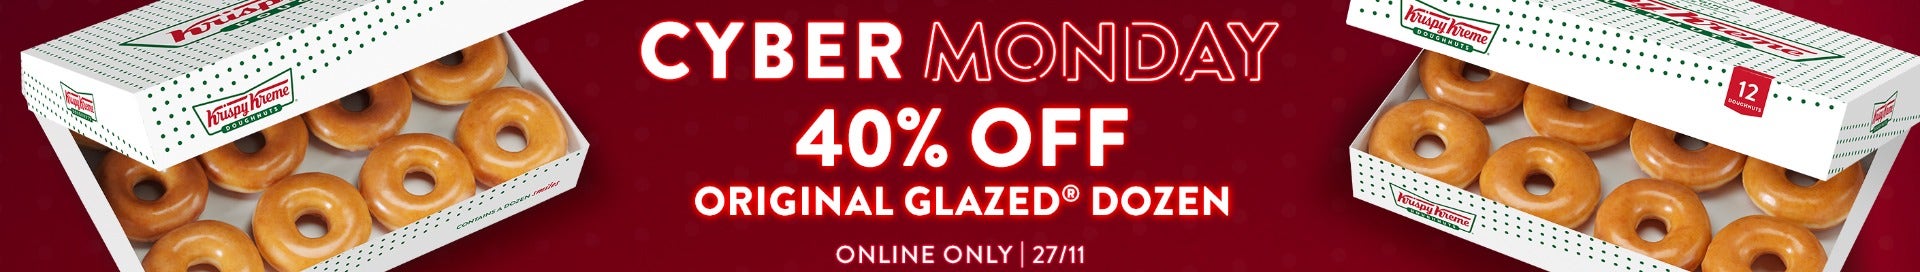 Cyber Monday Online Only Sale Banner in Neon - 40% off Original Glazed Doughnuts - Pictured in Dozen boxes on Black Background